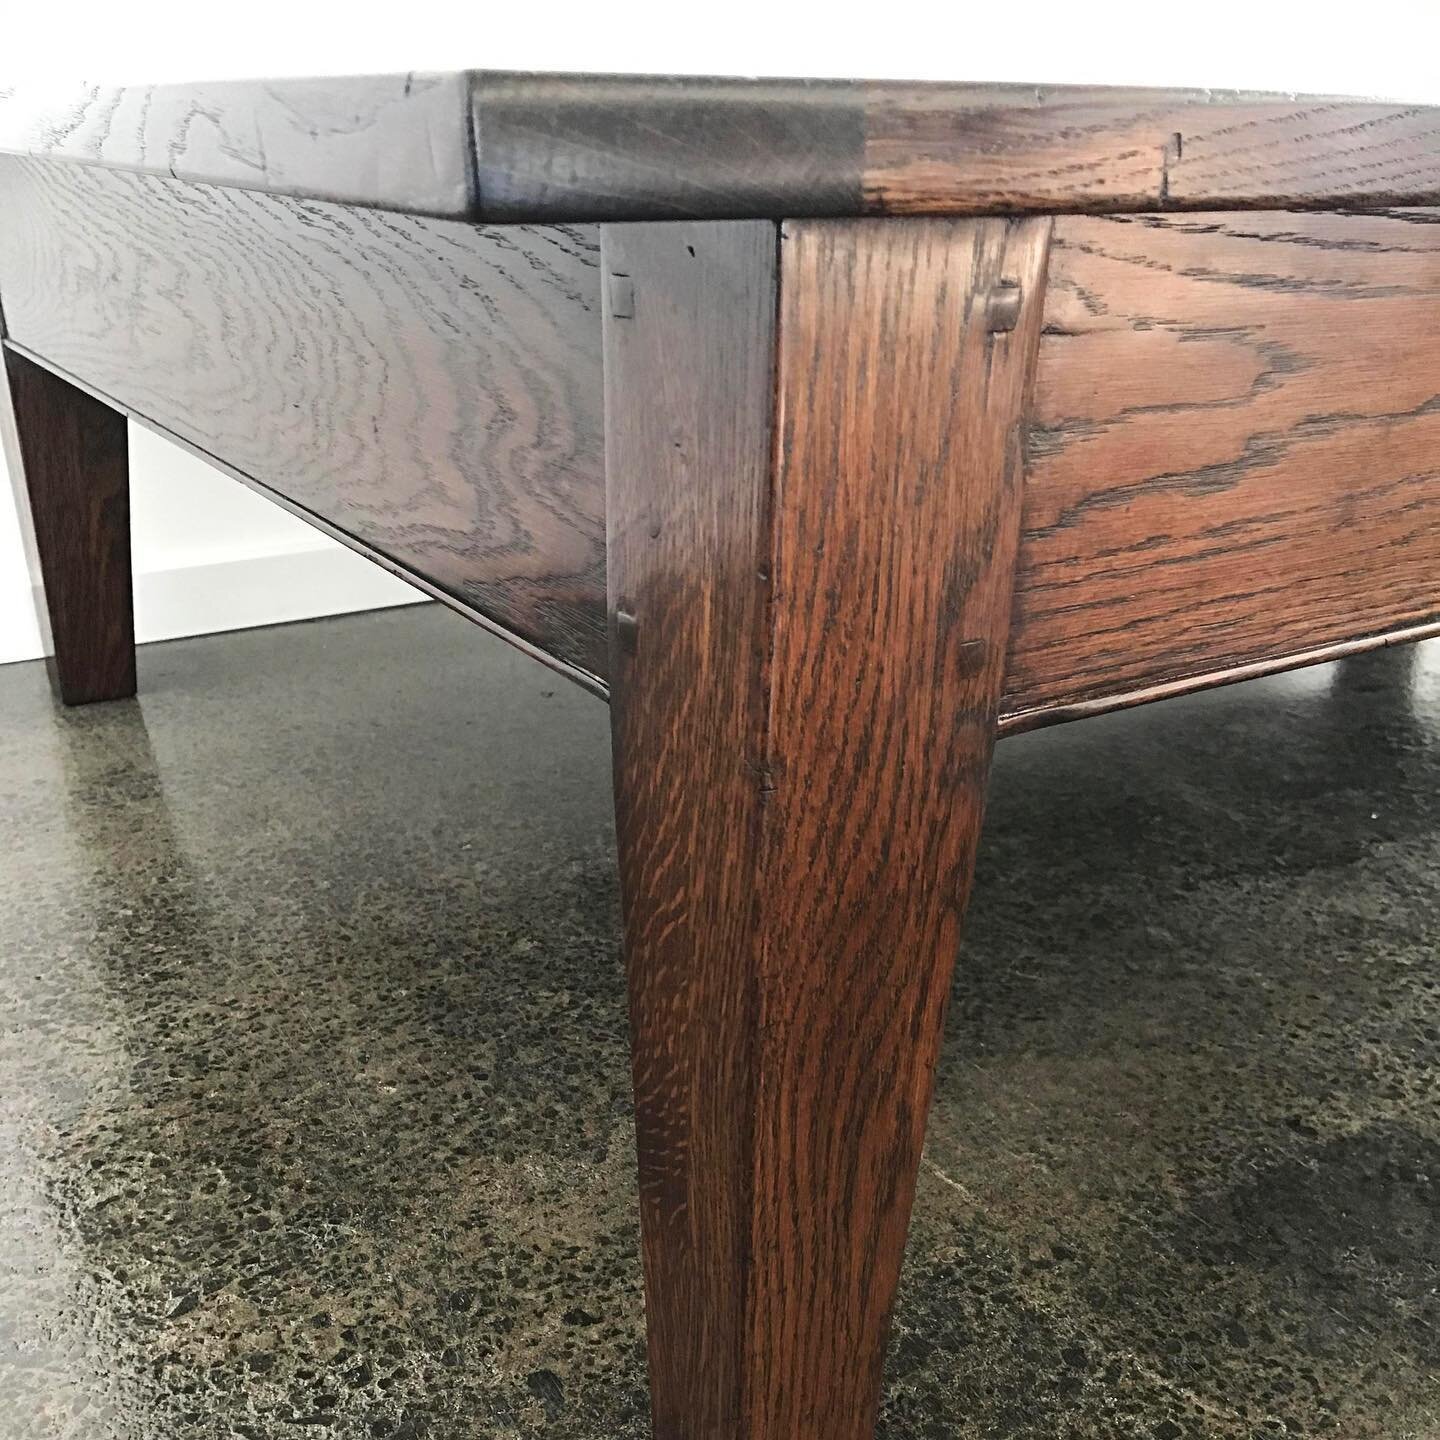 Tree nail detailing... an antique fixing that is now one for aesthetics only. A beautiful reminder of how manufacturing has evolved.

This coffee table is a representation of our clients' aspiration to create an original country aesthetic in their li